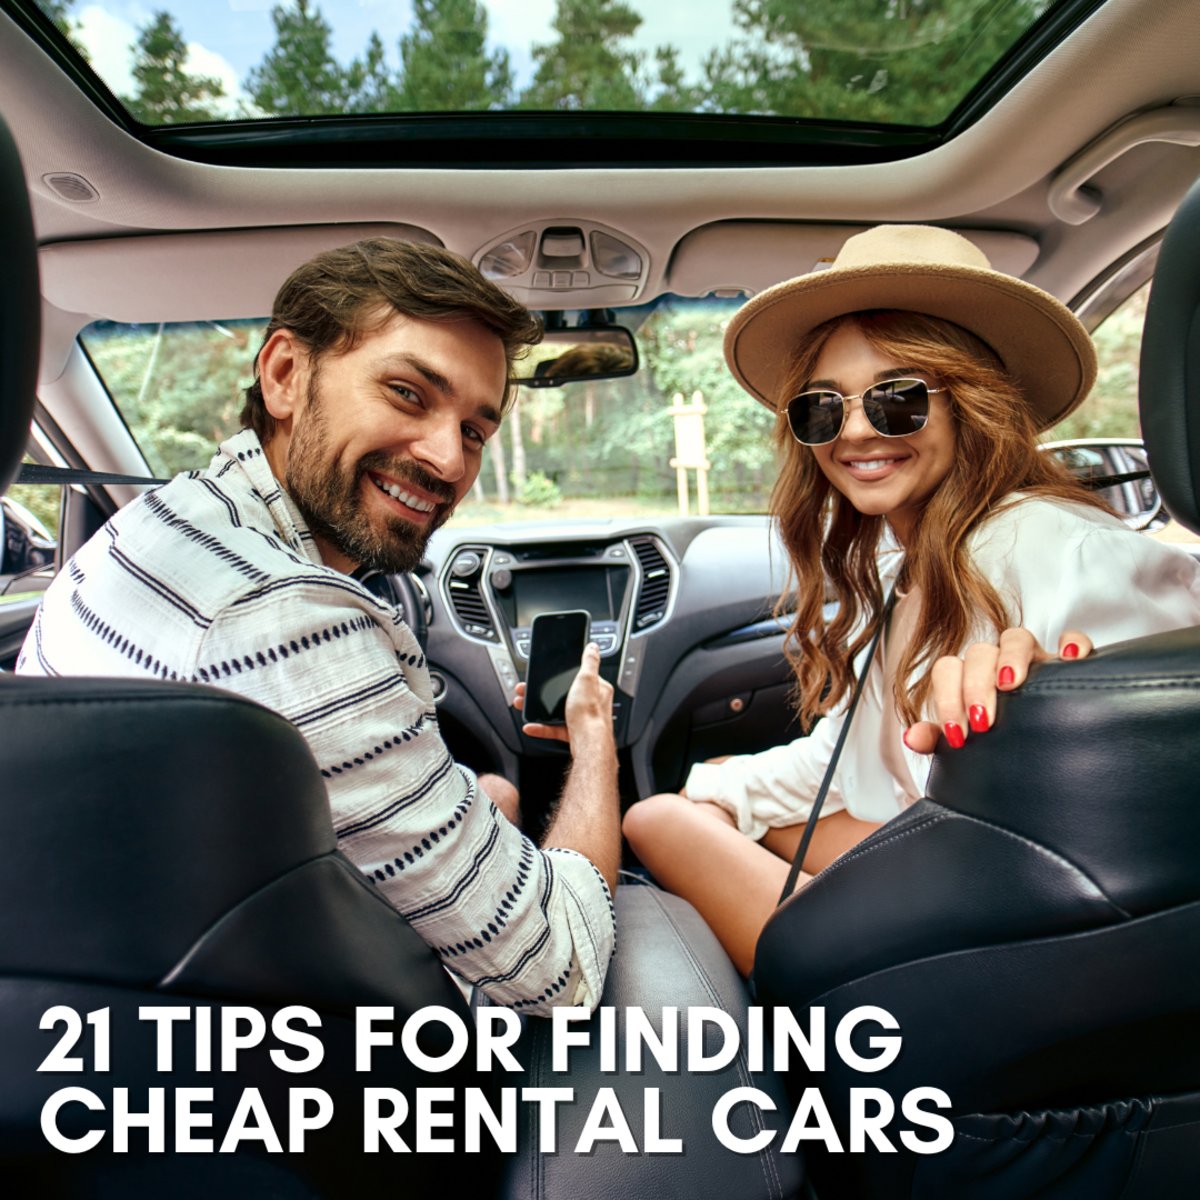 Planning on hitting the open road on your way to Reno? 🚗 Read these 21 tips for scoring sweet deals on #rentalcars so that you can explore without breaking the bank. bit.ly/3uBCqBJ #roadtrip #savvytraveler